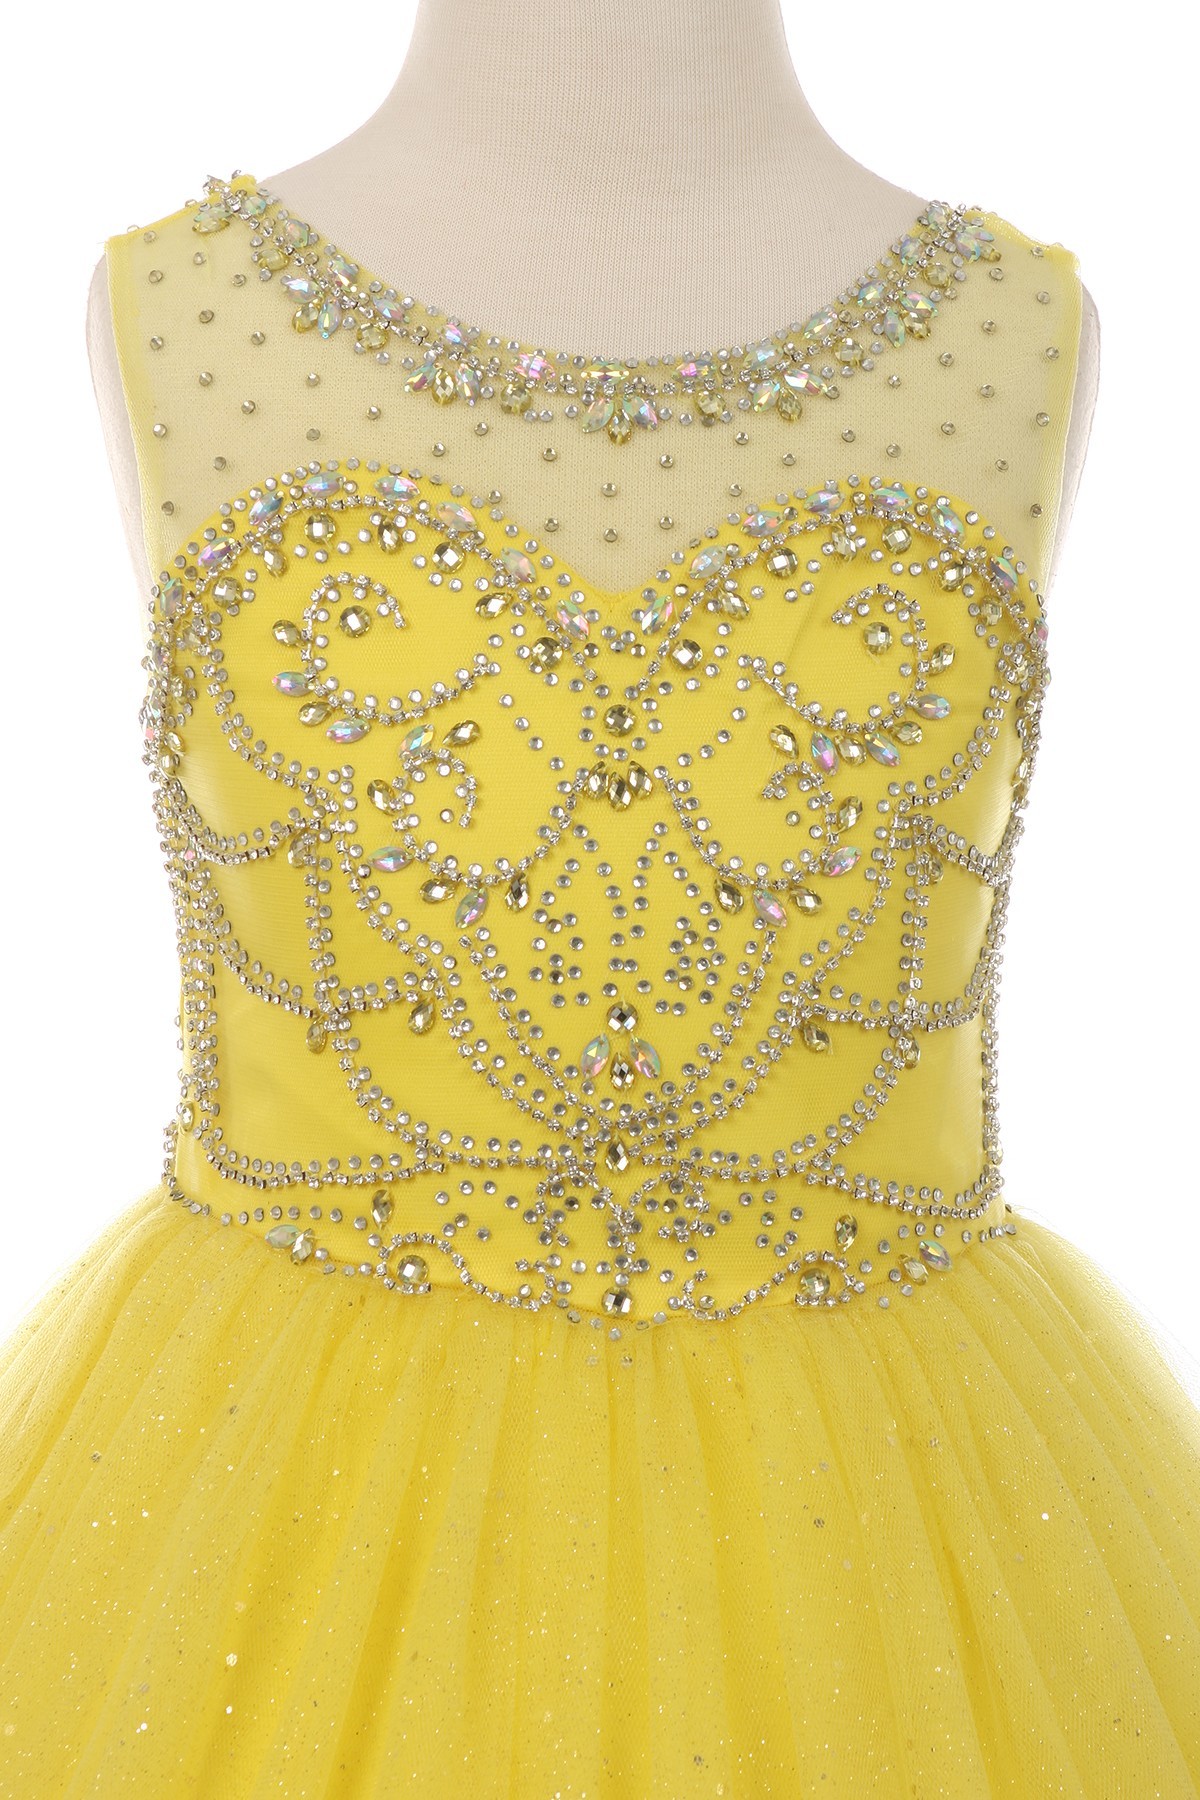 girls yellow easter dress with beaded bodice